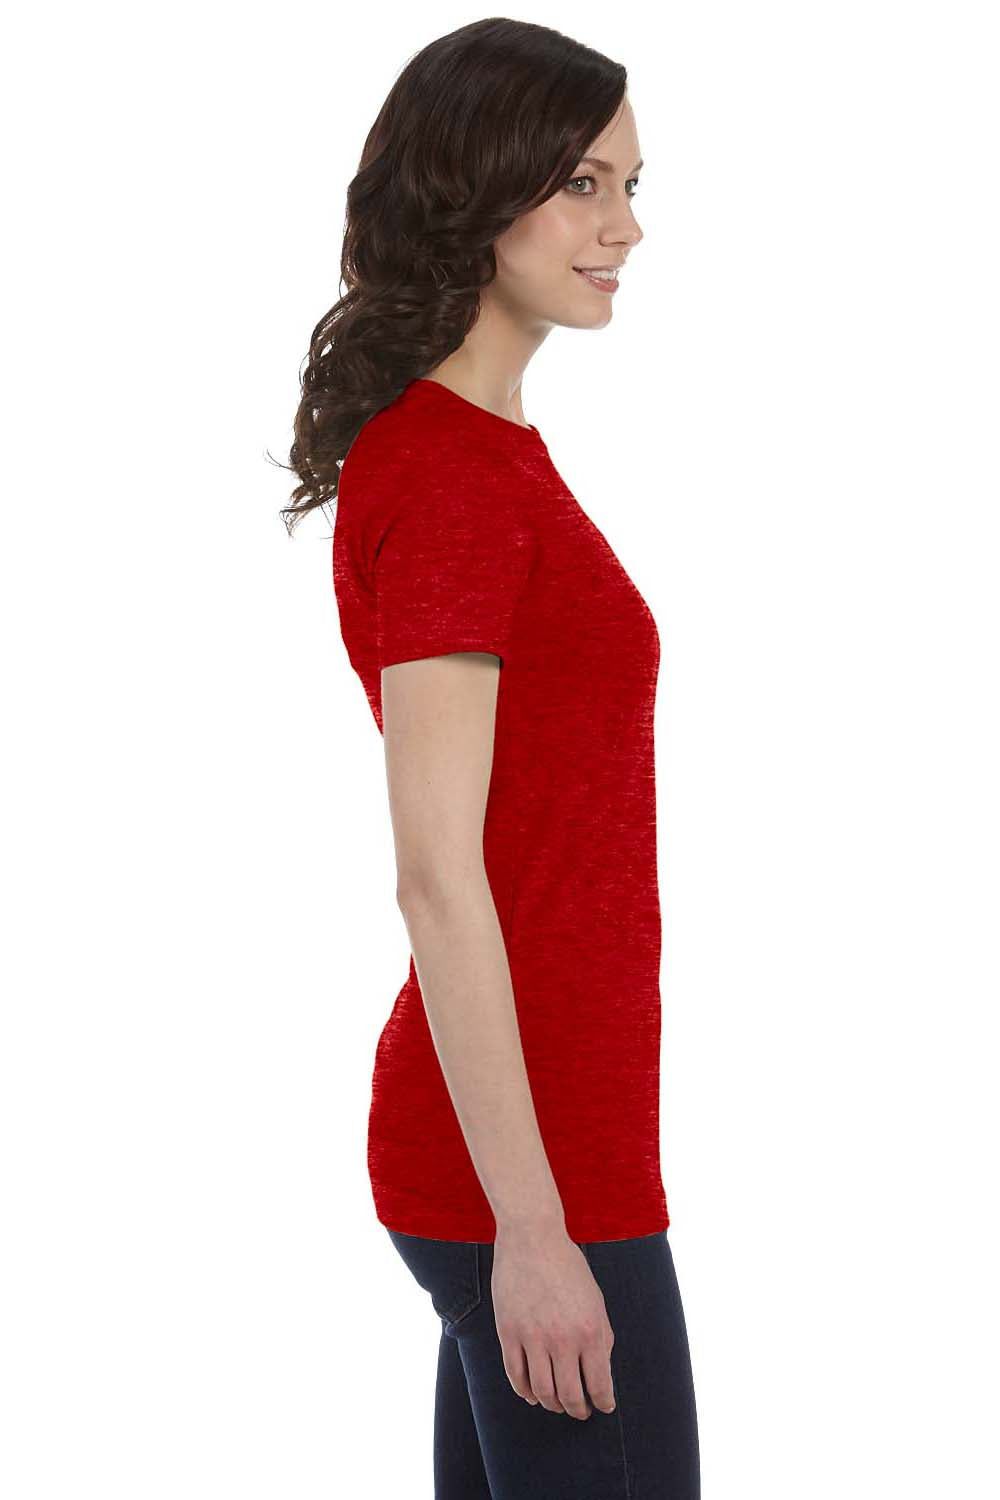 Bella + Canvas 6004 Womens The Favorite Short Sleeve Crewneck T-Shirt Heather Red Side